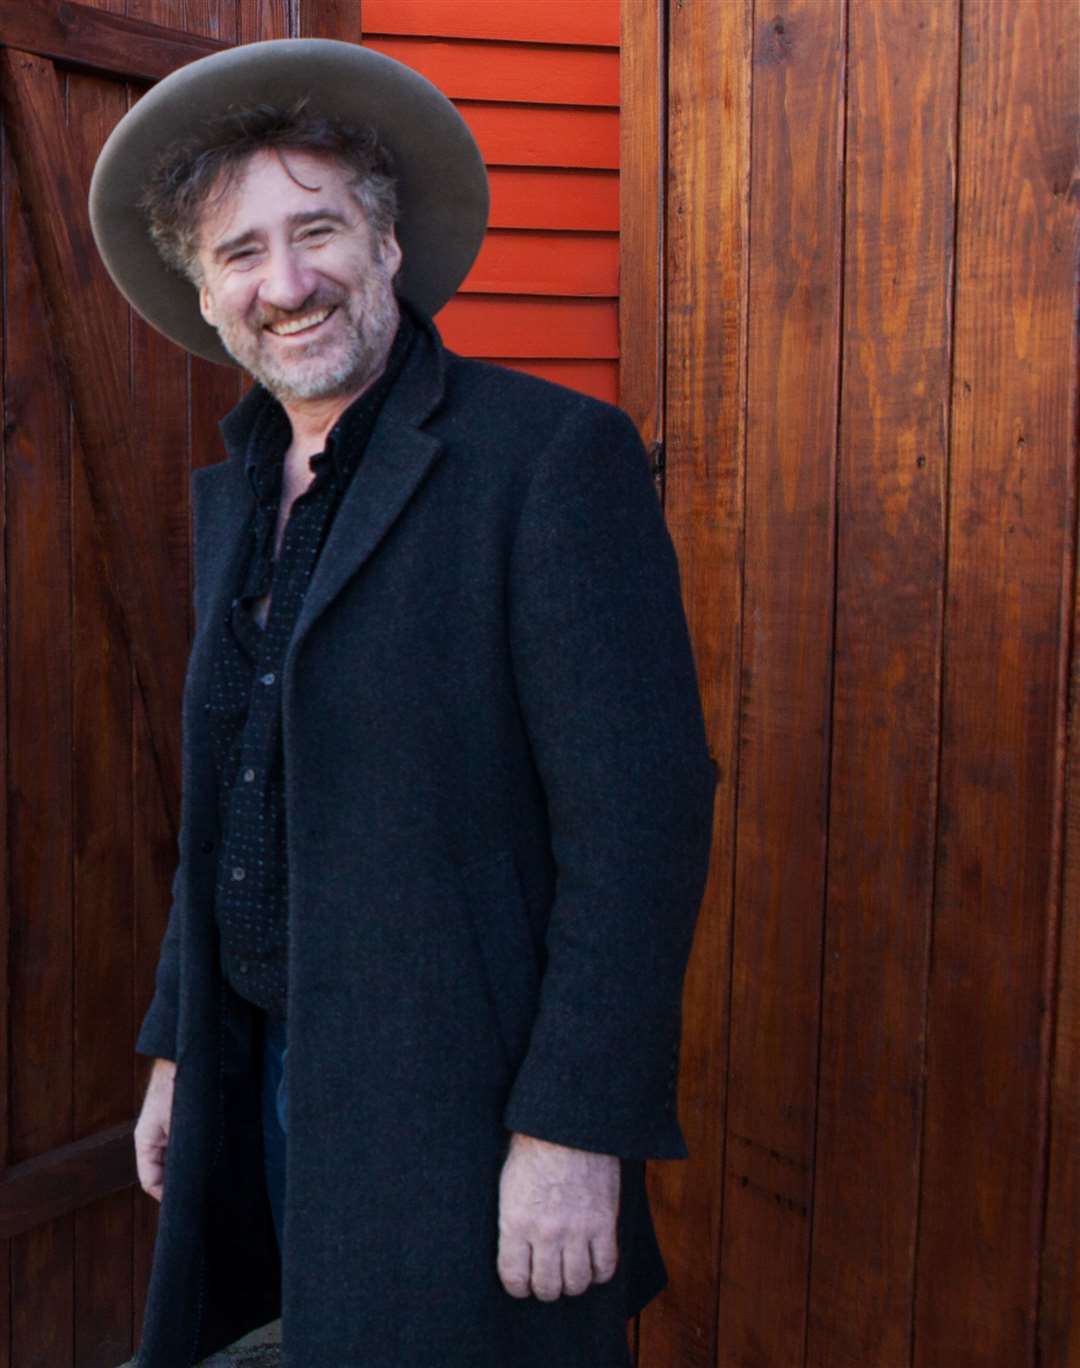 Jon Cleary will be at Rye